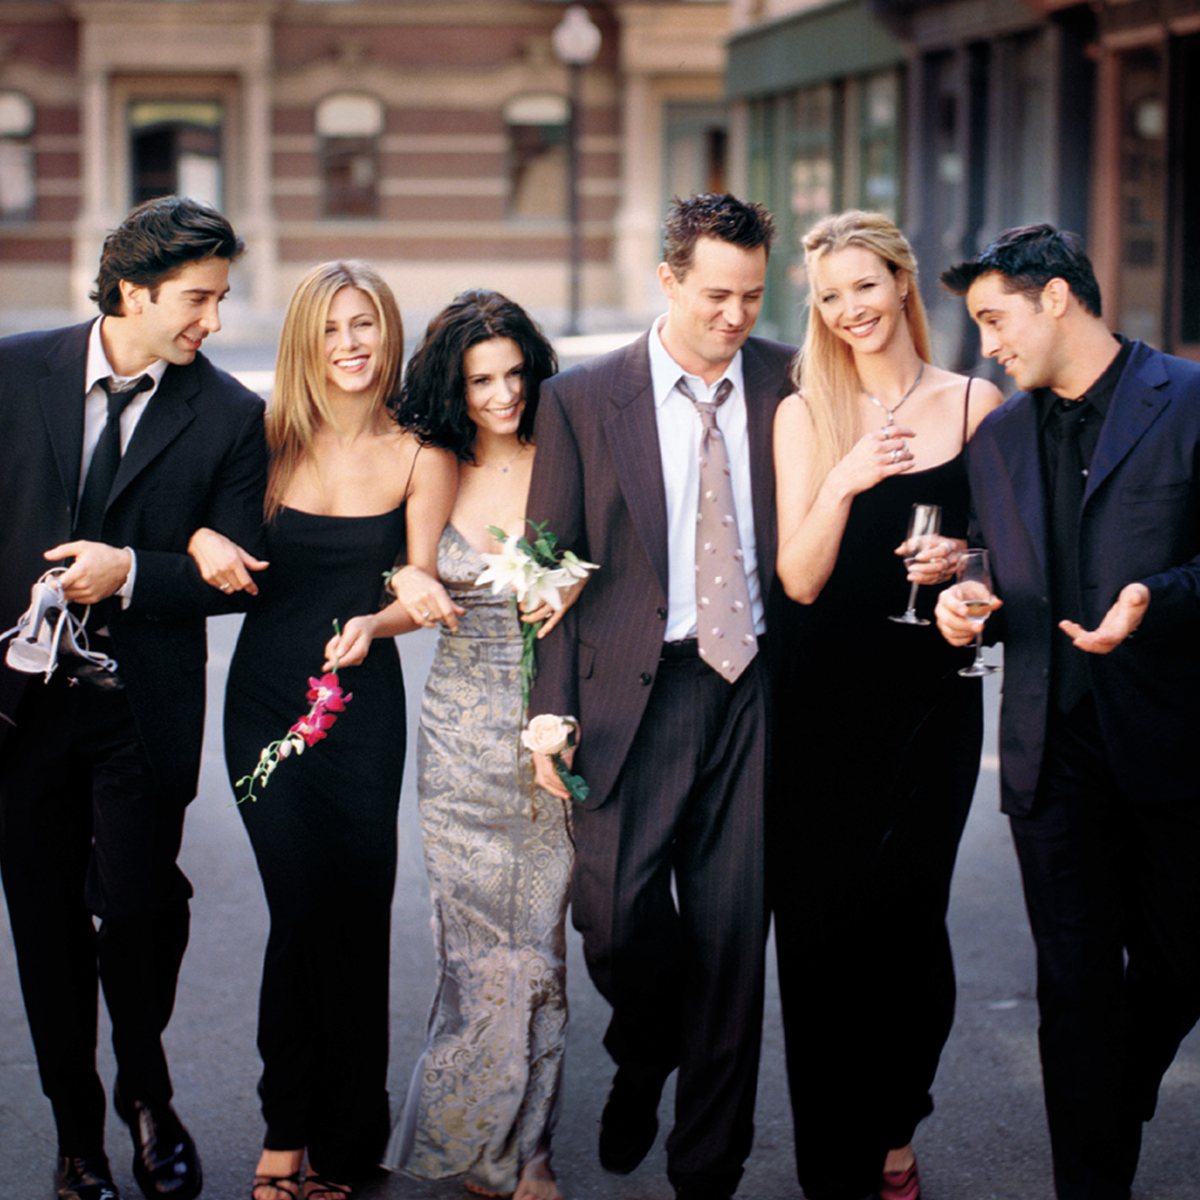 Then vs Now: Here’s where the cast members of Friends are 17 years later